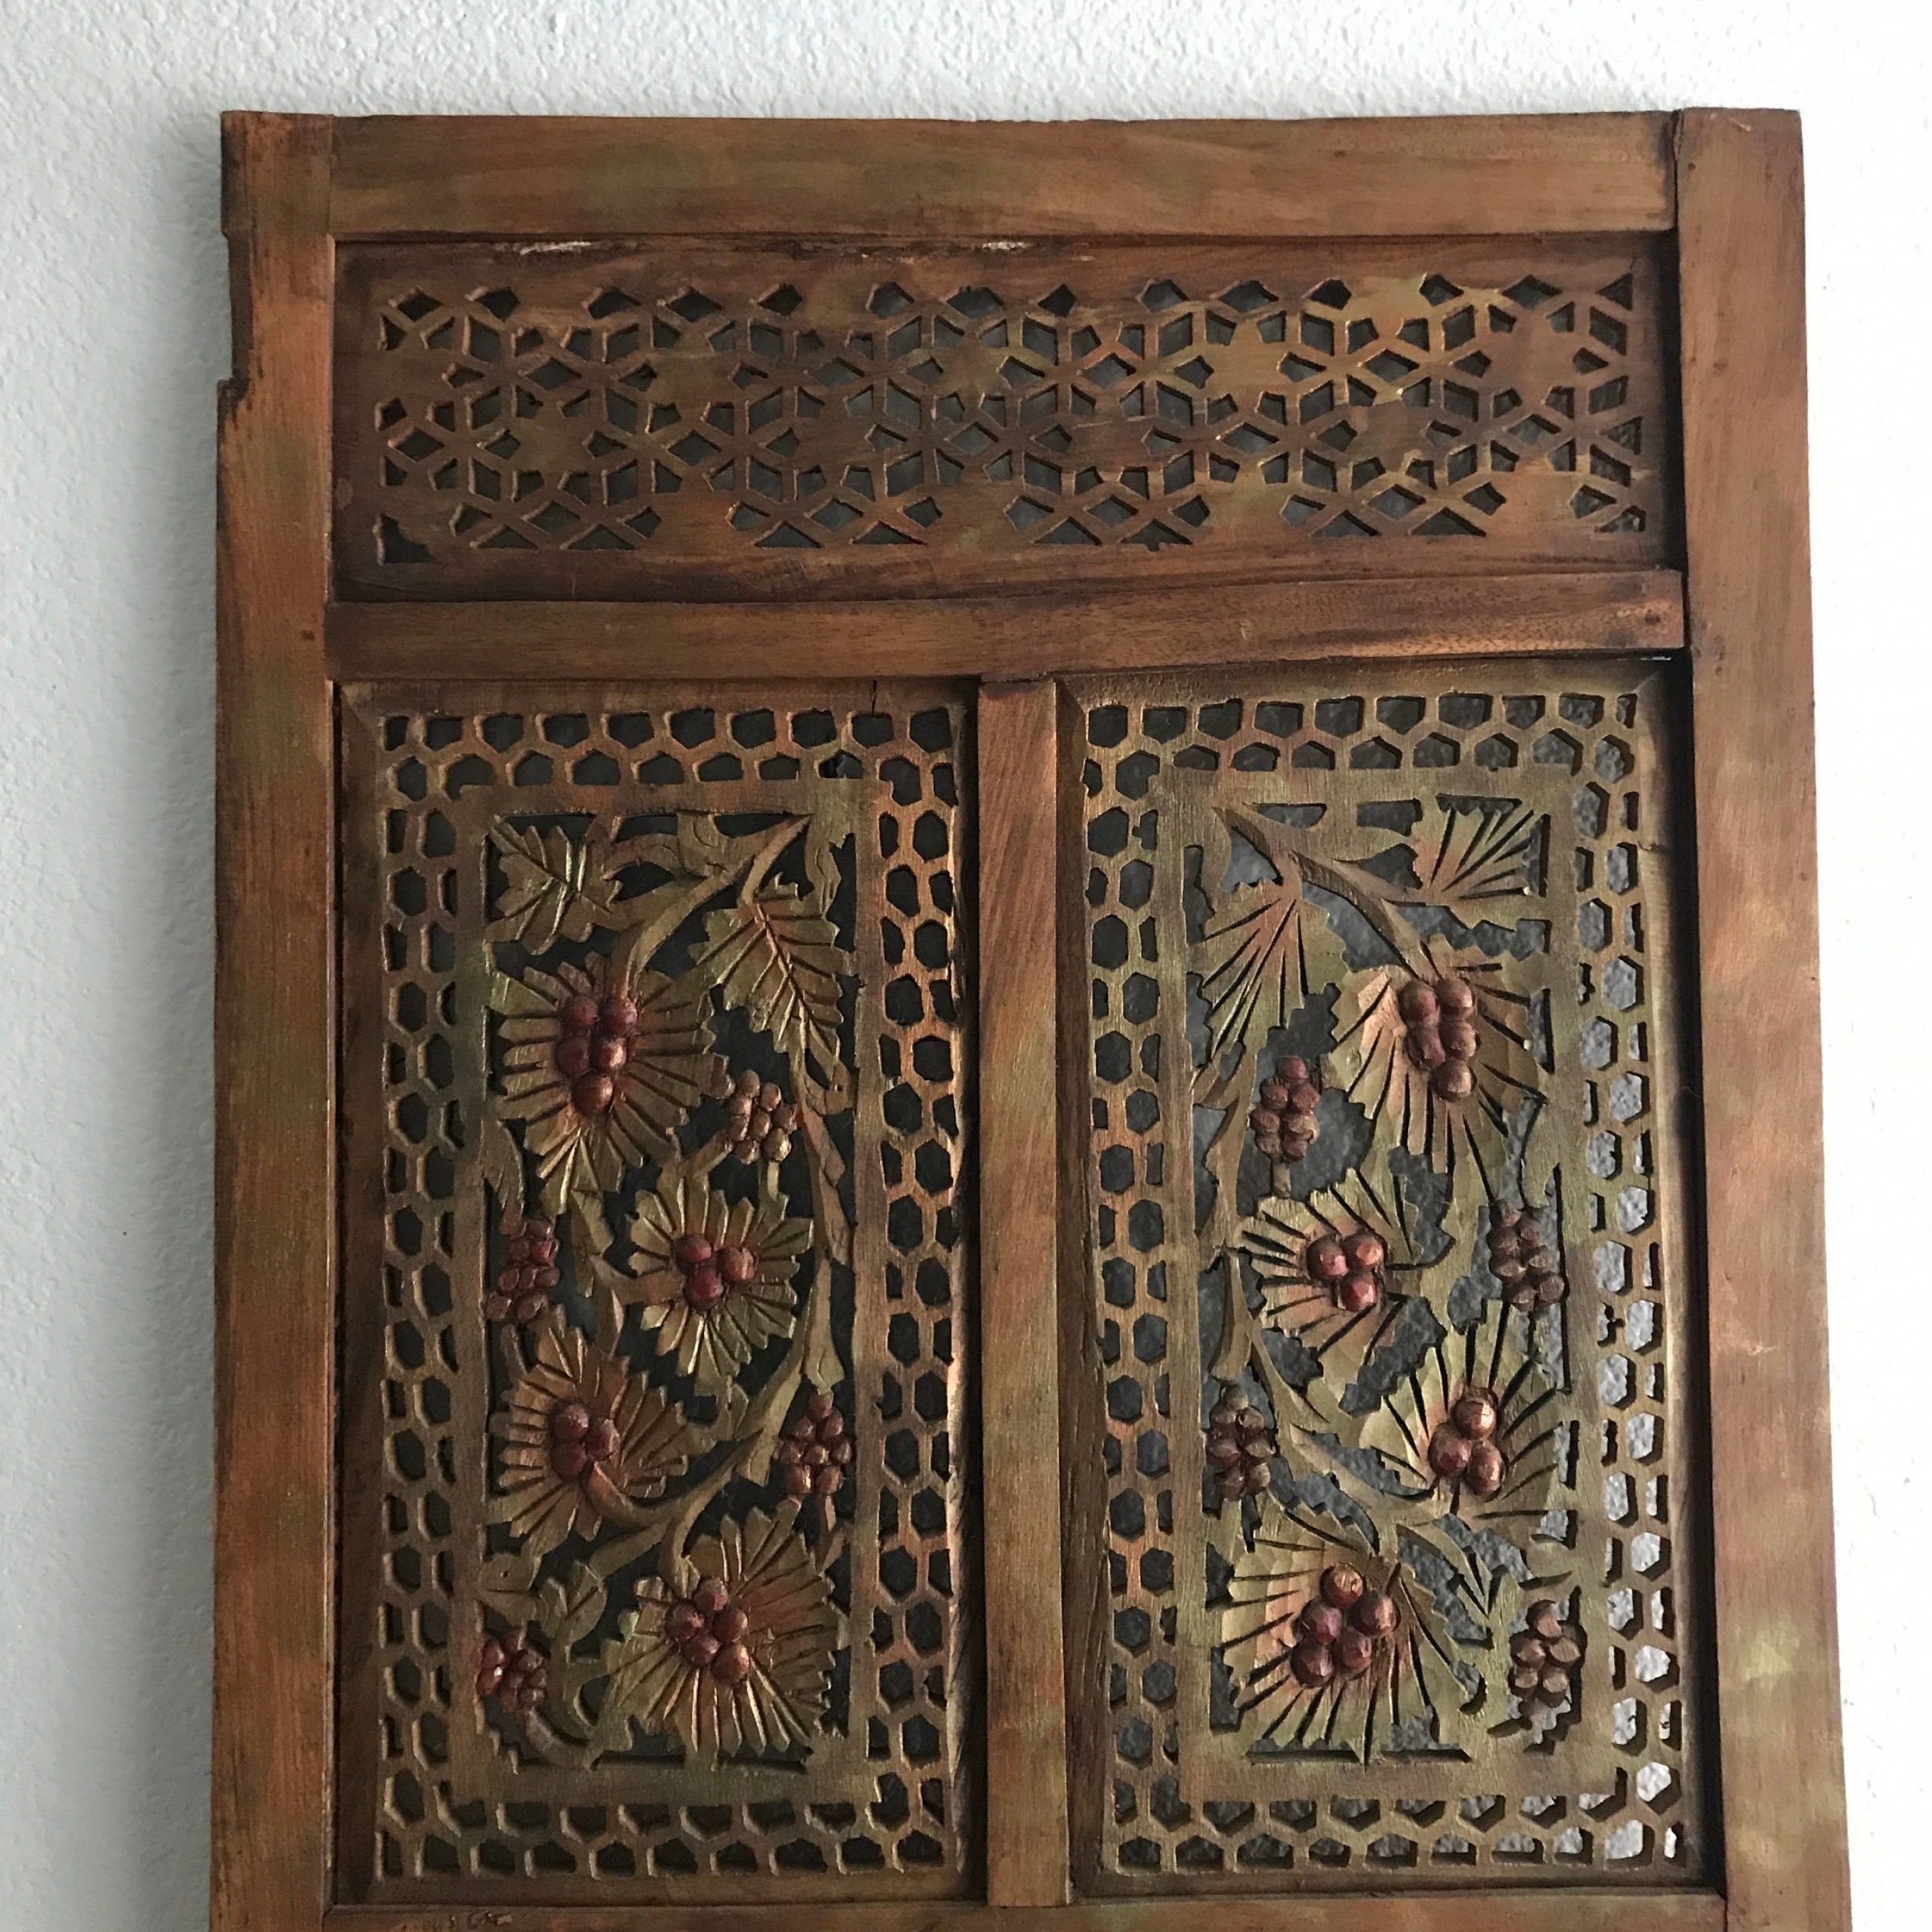 Large Ornate Bohemian Carved Wooden Wall Art Panel / India Carved Wood Pertaining To Most Current Filigree Screen Wall Art (View 1 of 20)